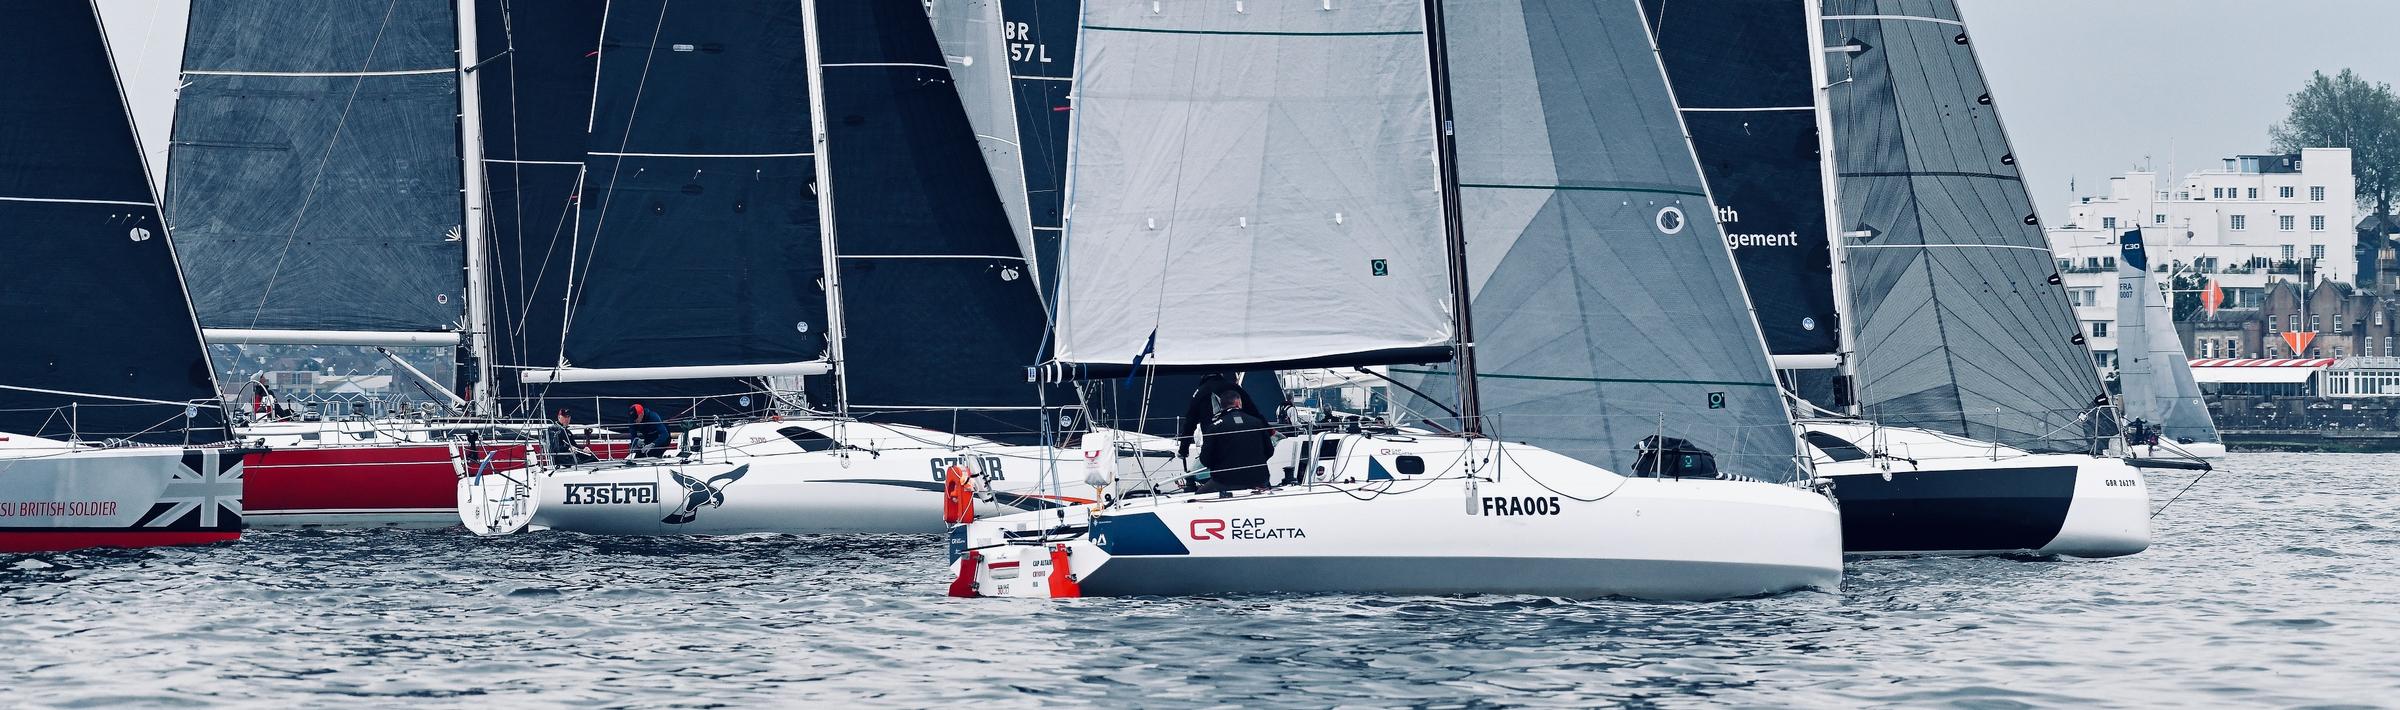 Race Report RORC De Guingand Bowl Race

Start: Saturday 18 May - RYS Line, Cowes IOW

Course: Cowes-Around Marks (Approx. 110 NM) © Rick Tomlinson/RORC